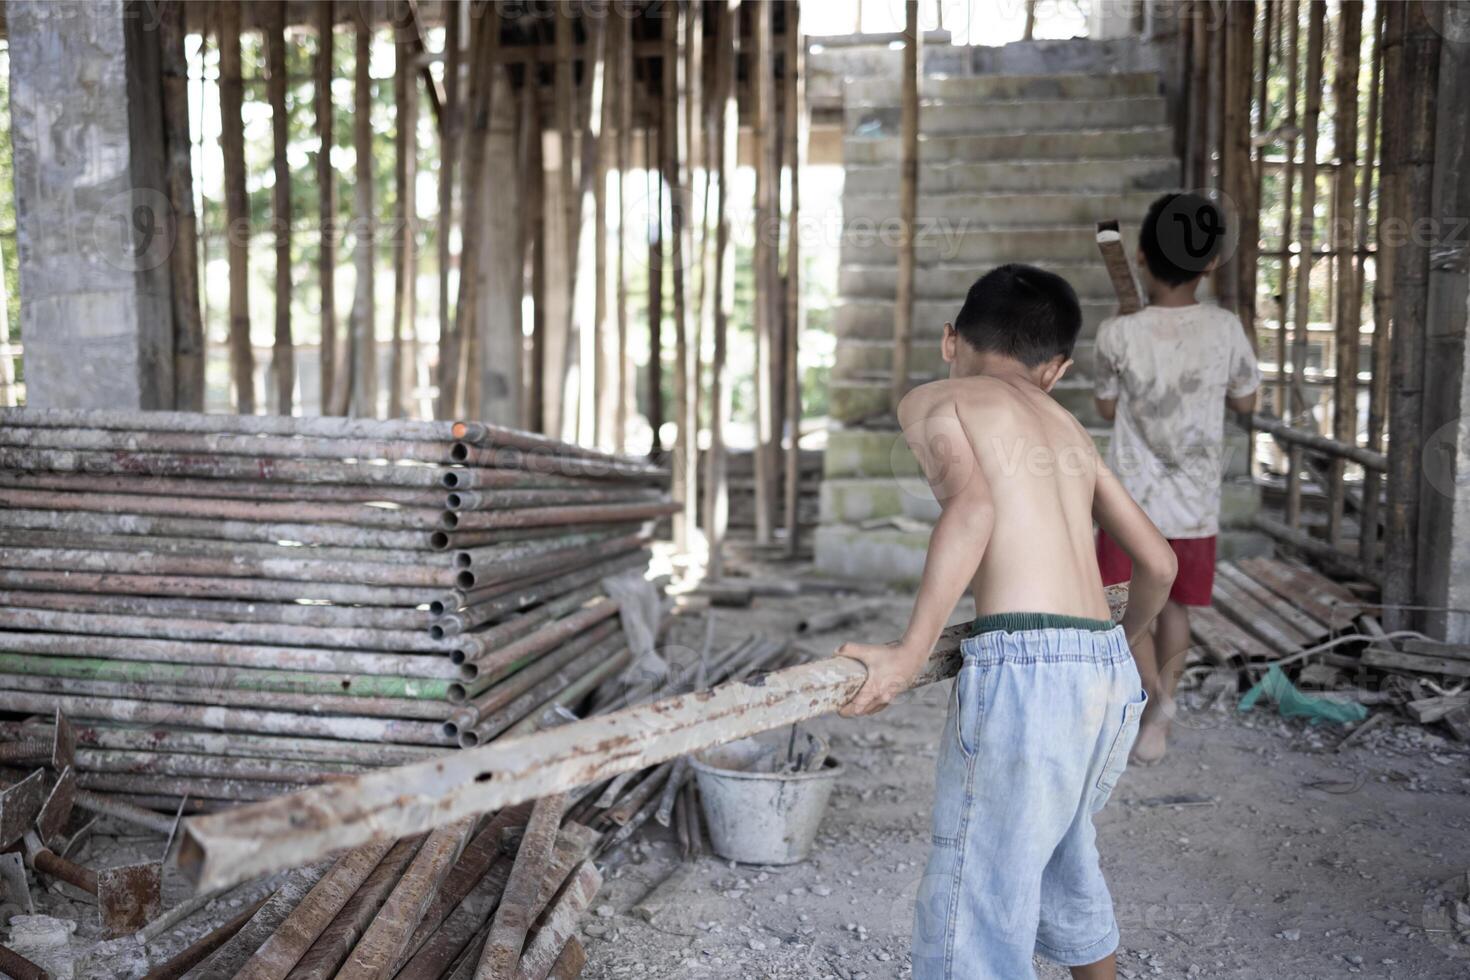 Poor children at the construction site were forced to work. Concept against child labor. The oppression or intimidation of forced labor among children. Human trafficking. photo